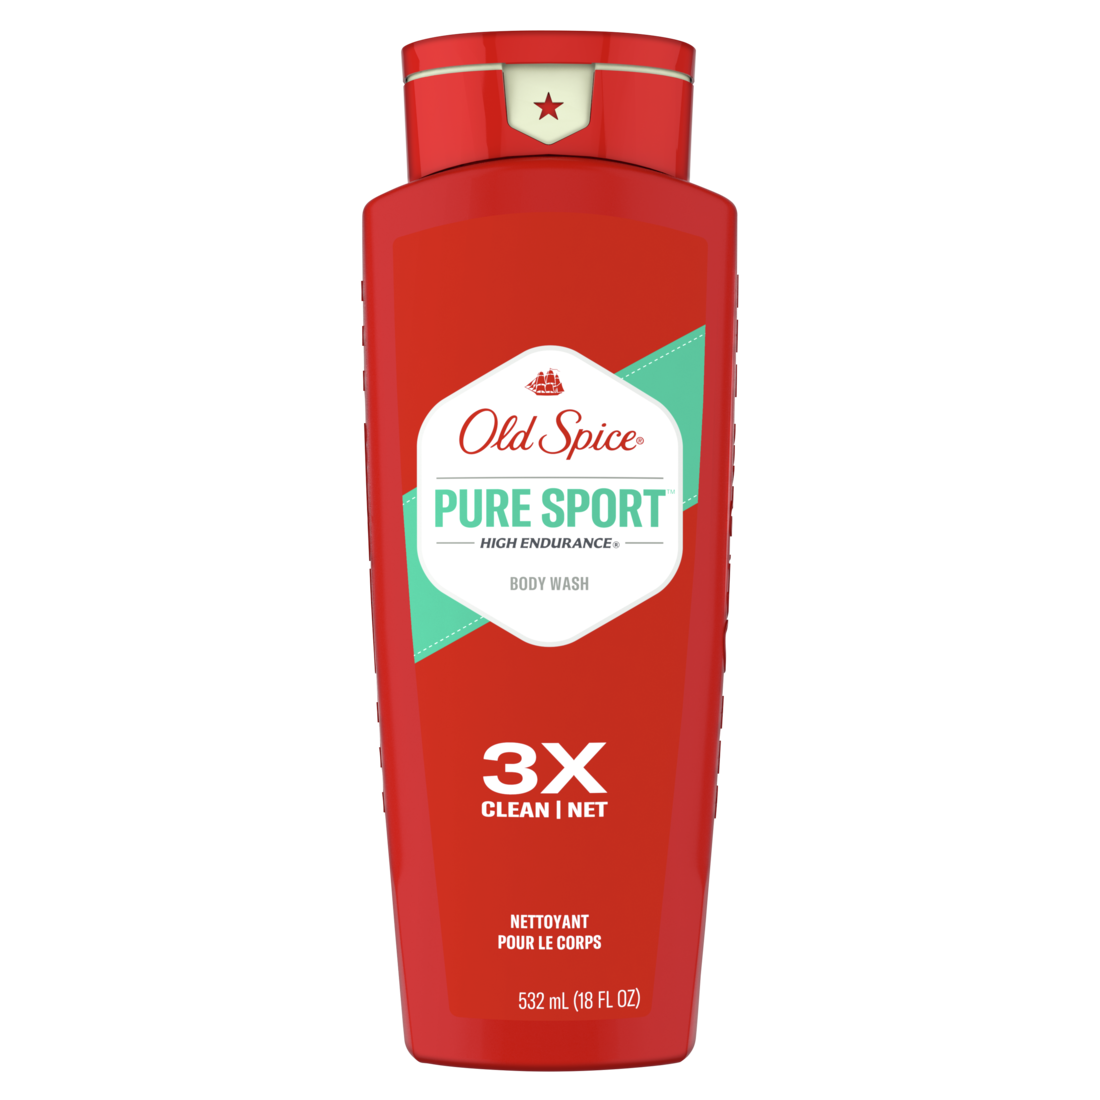 Old Spice High Endurance Body Wash for Men, Pure Sport Scent - 18oz/4pk